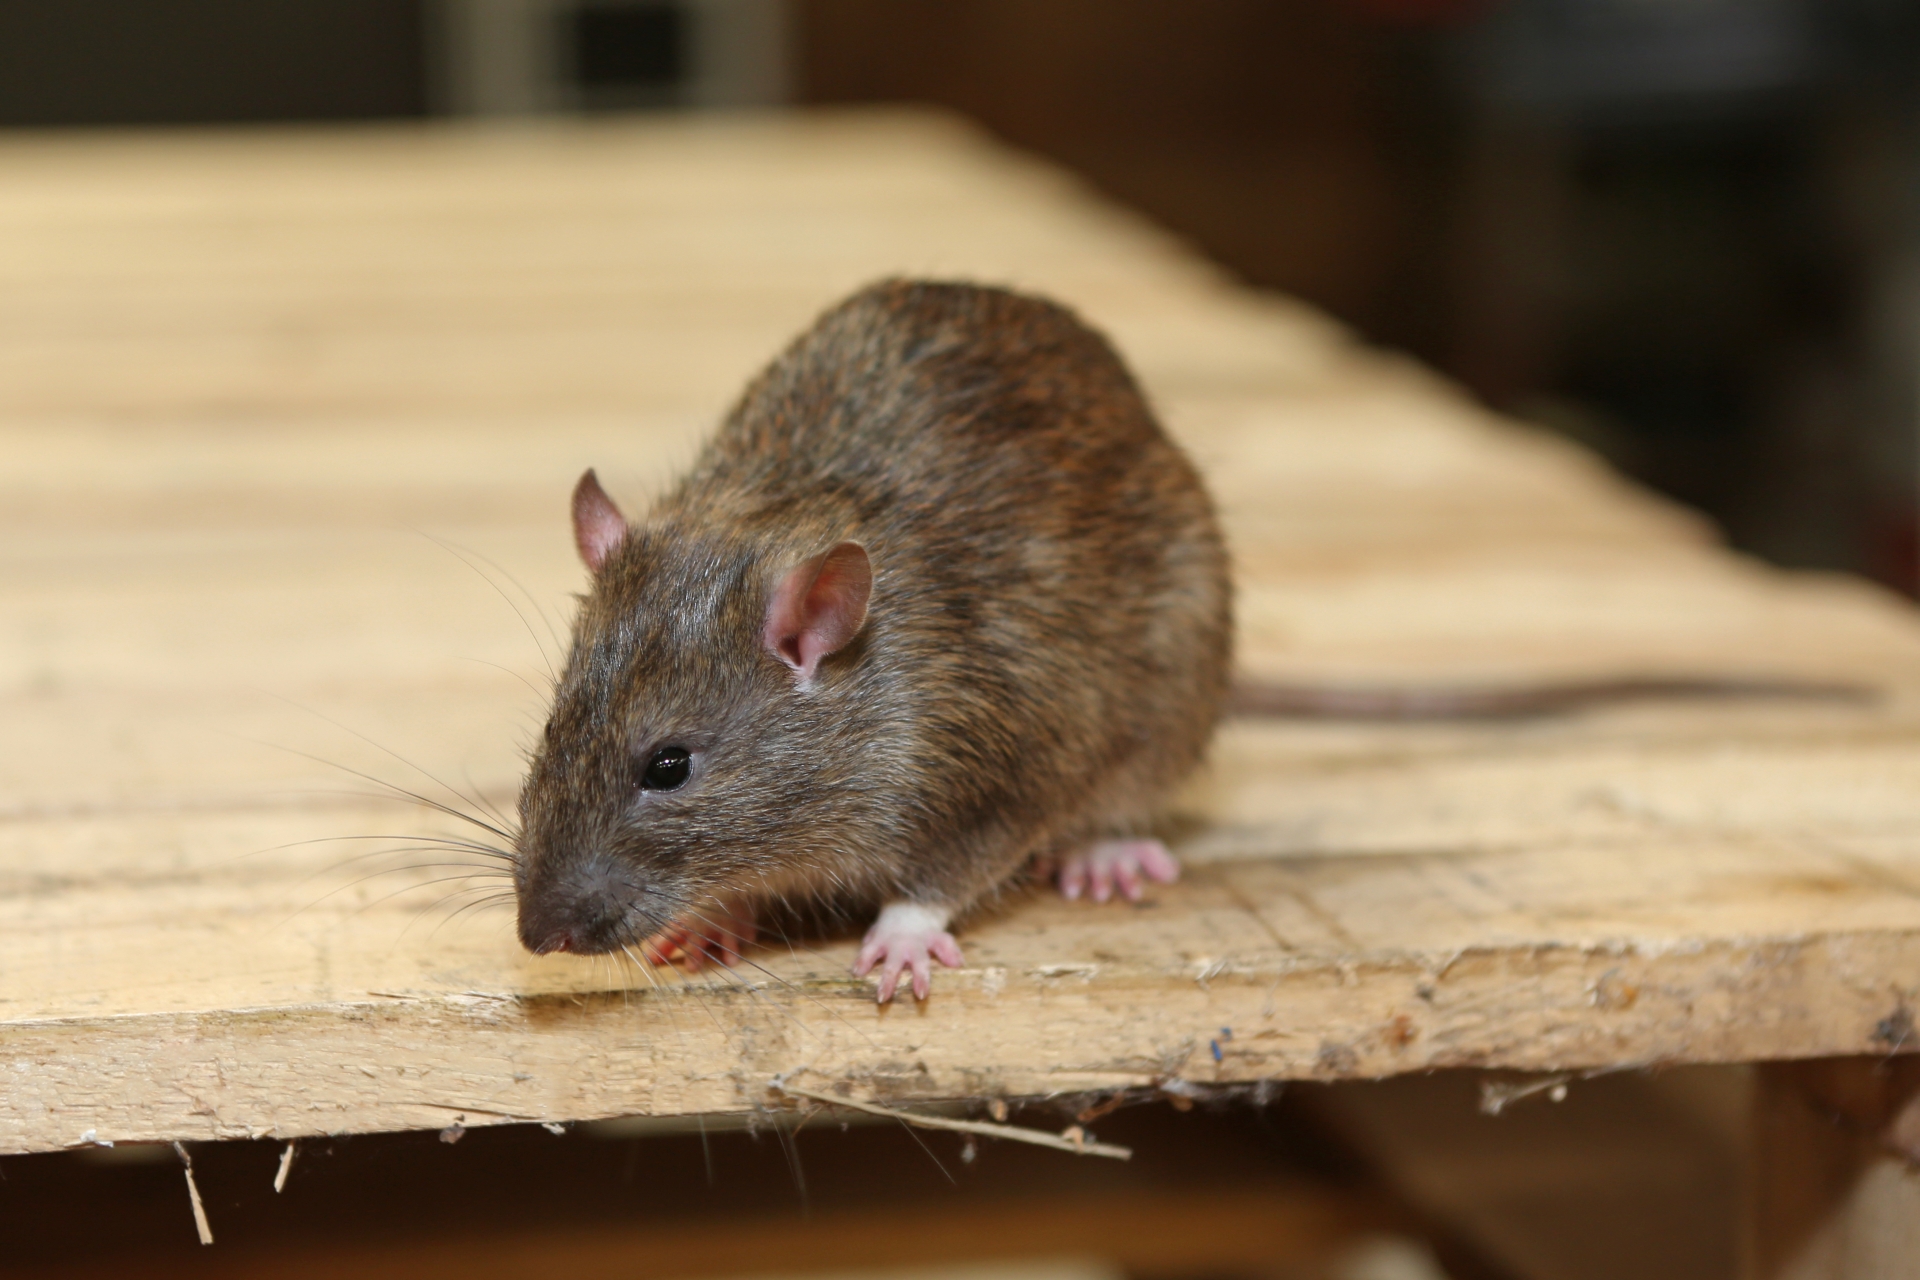 Rat Control, Pest Control in Barkingside, Hainault, IG6. Call Now 020 8166 9746